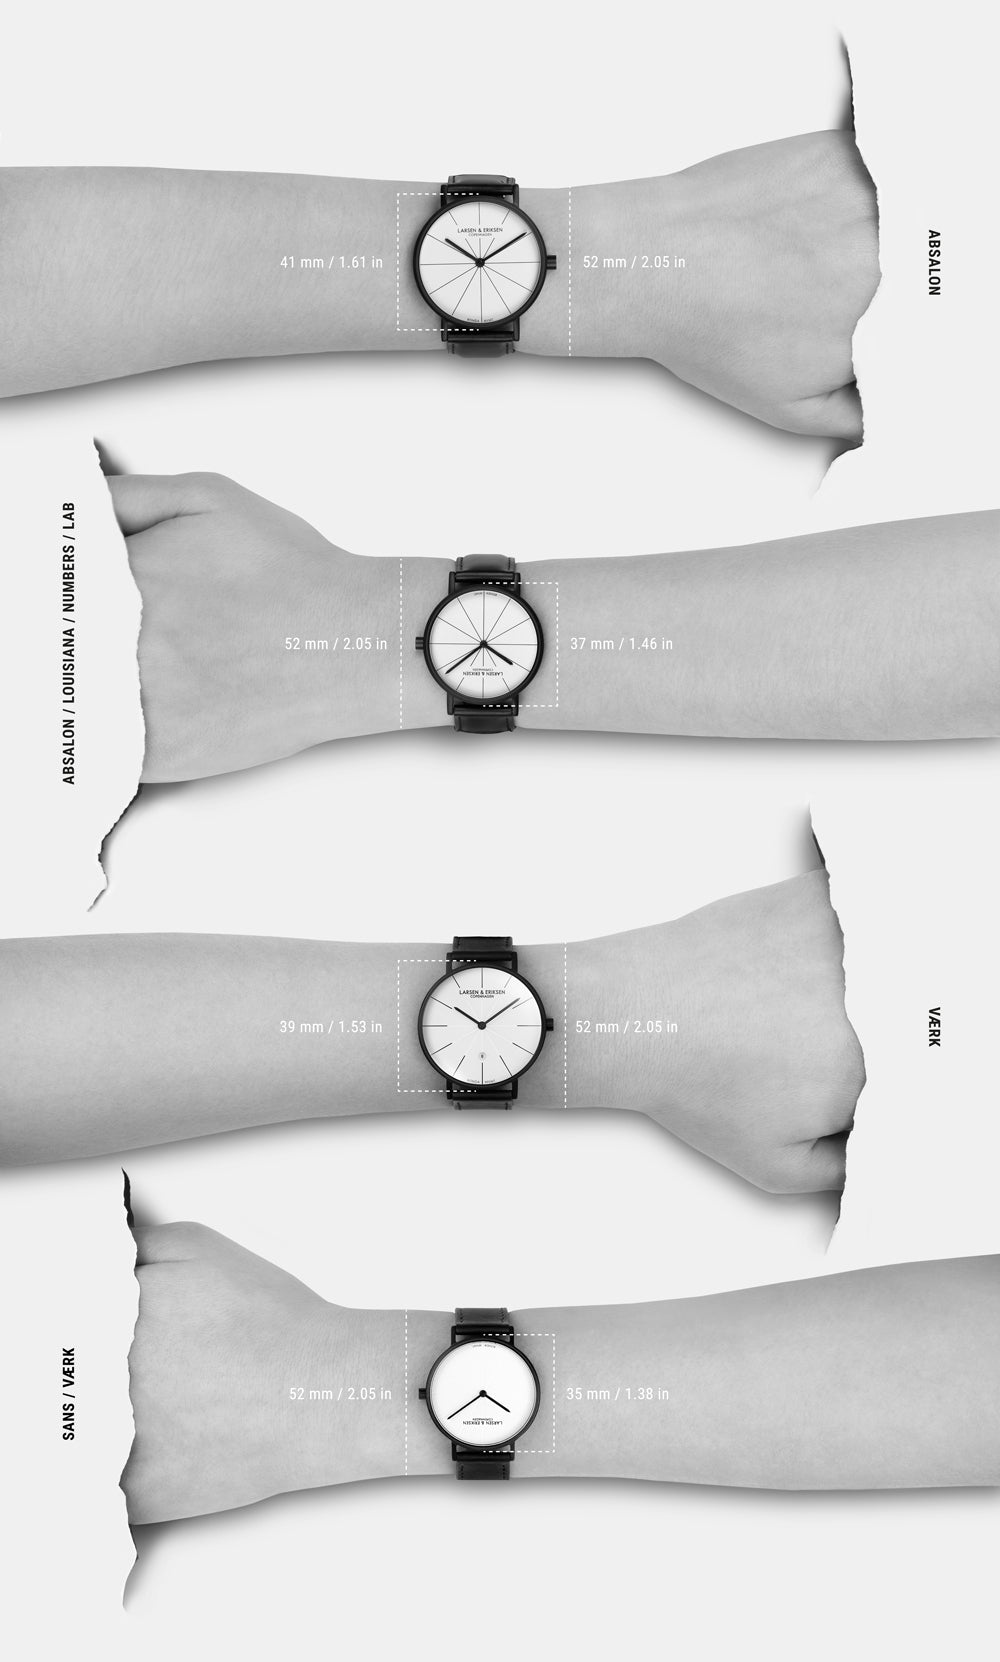 Watch Sizes Guide: Which Size Watch Is Best For You? | vlr.eng.br